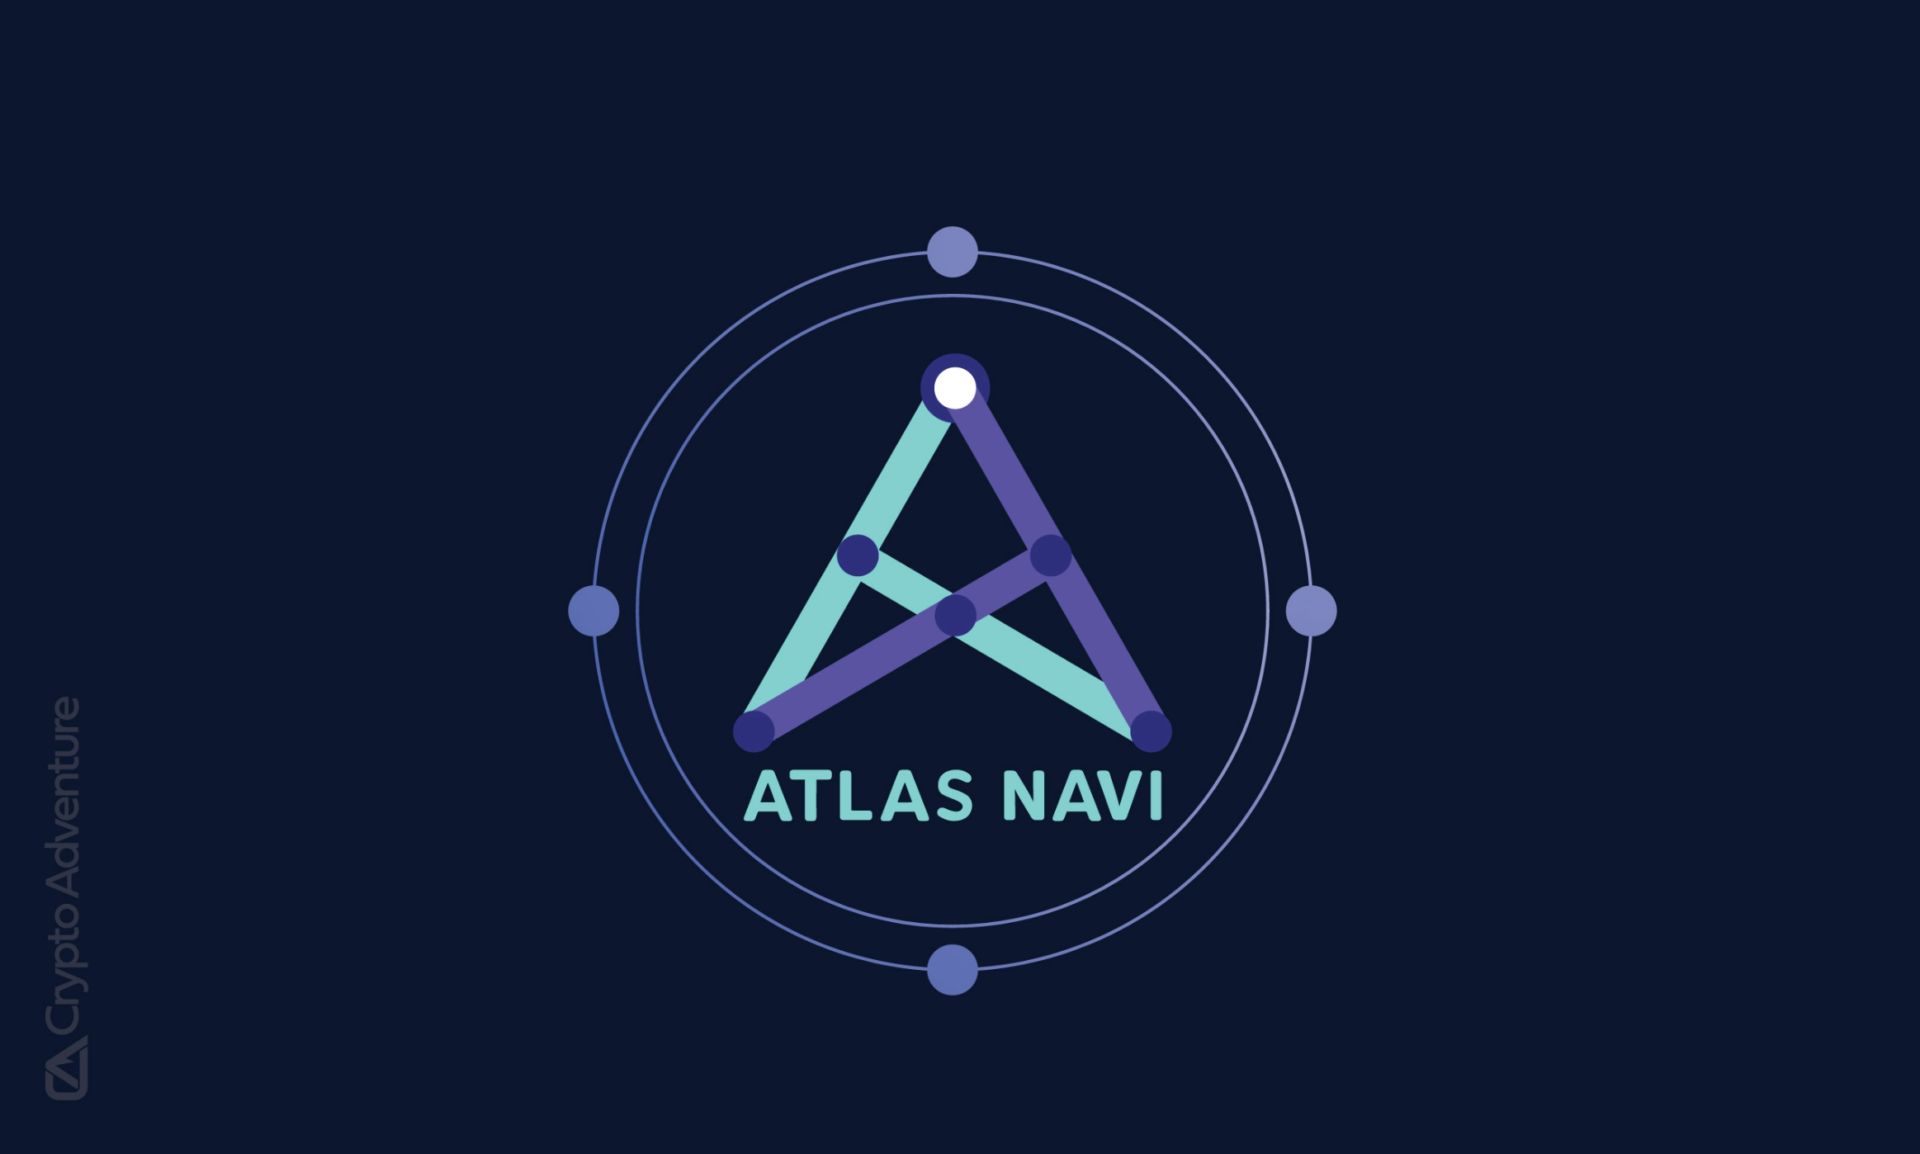 Atlas Navi launches flagship app to unite the virtual and digital worlds on the road